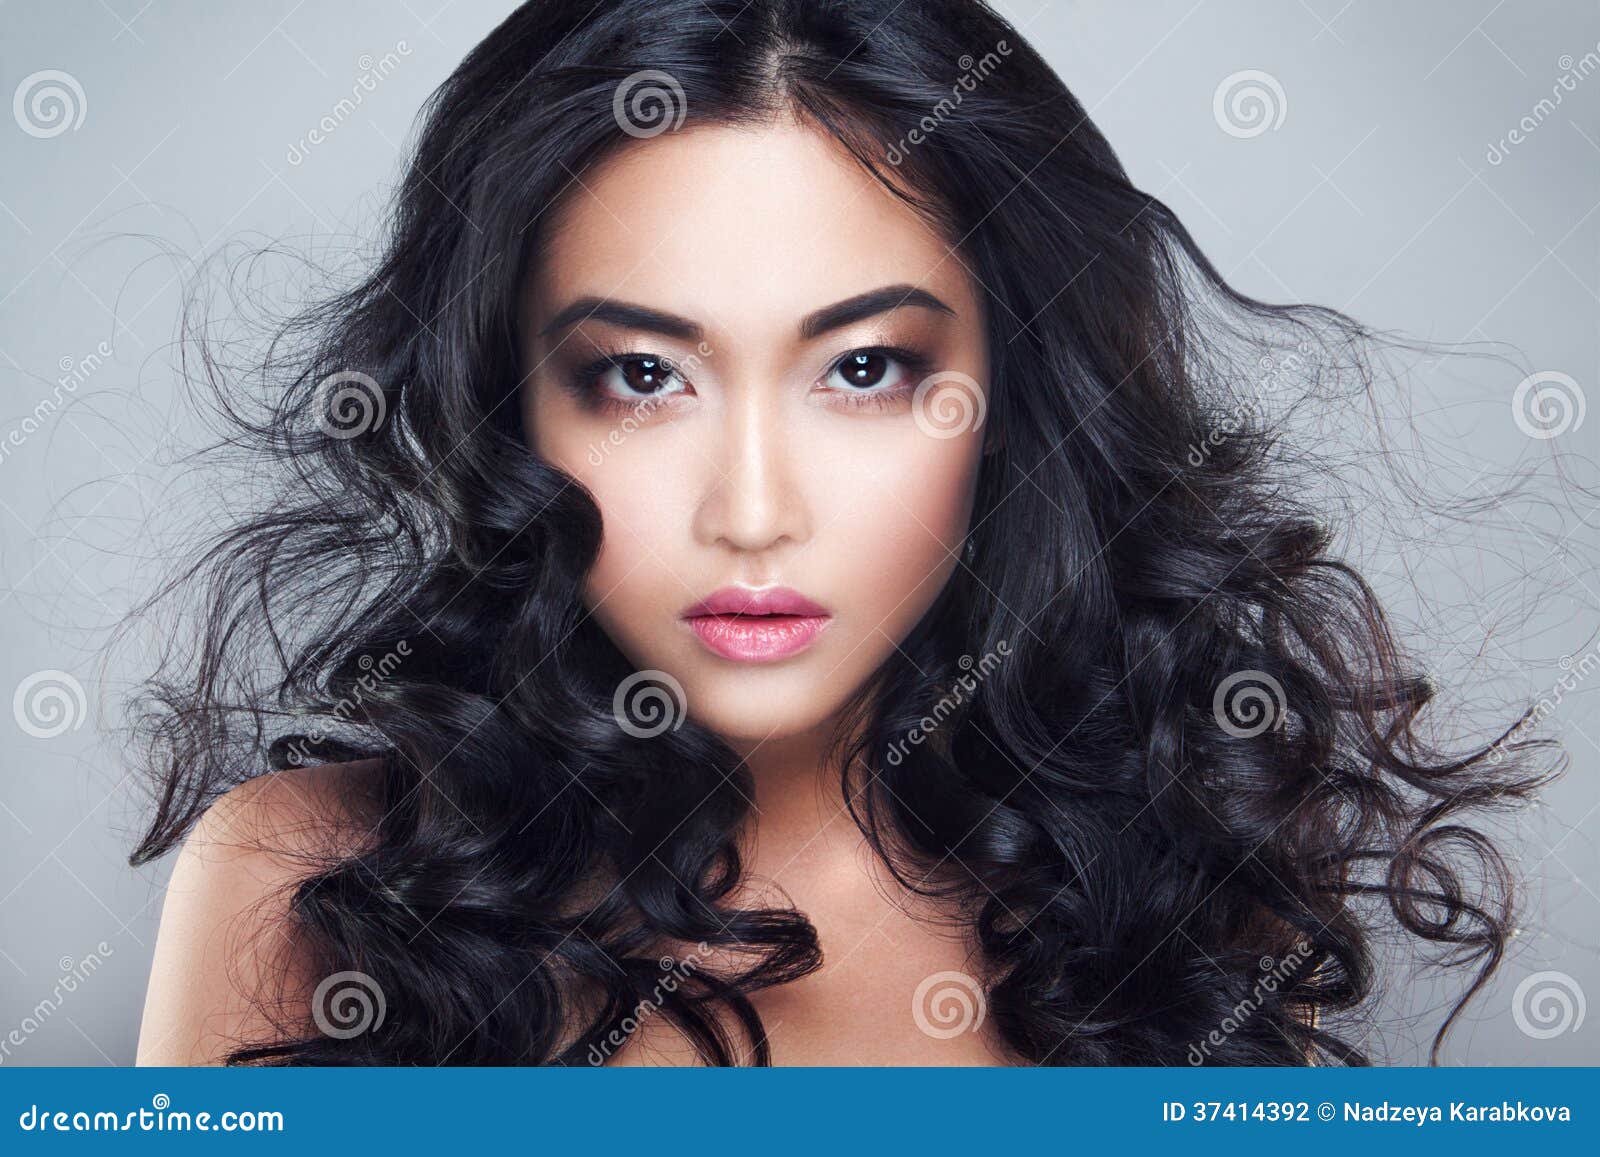 young and beautiful asian woman with curly hair